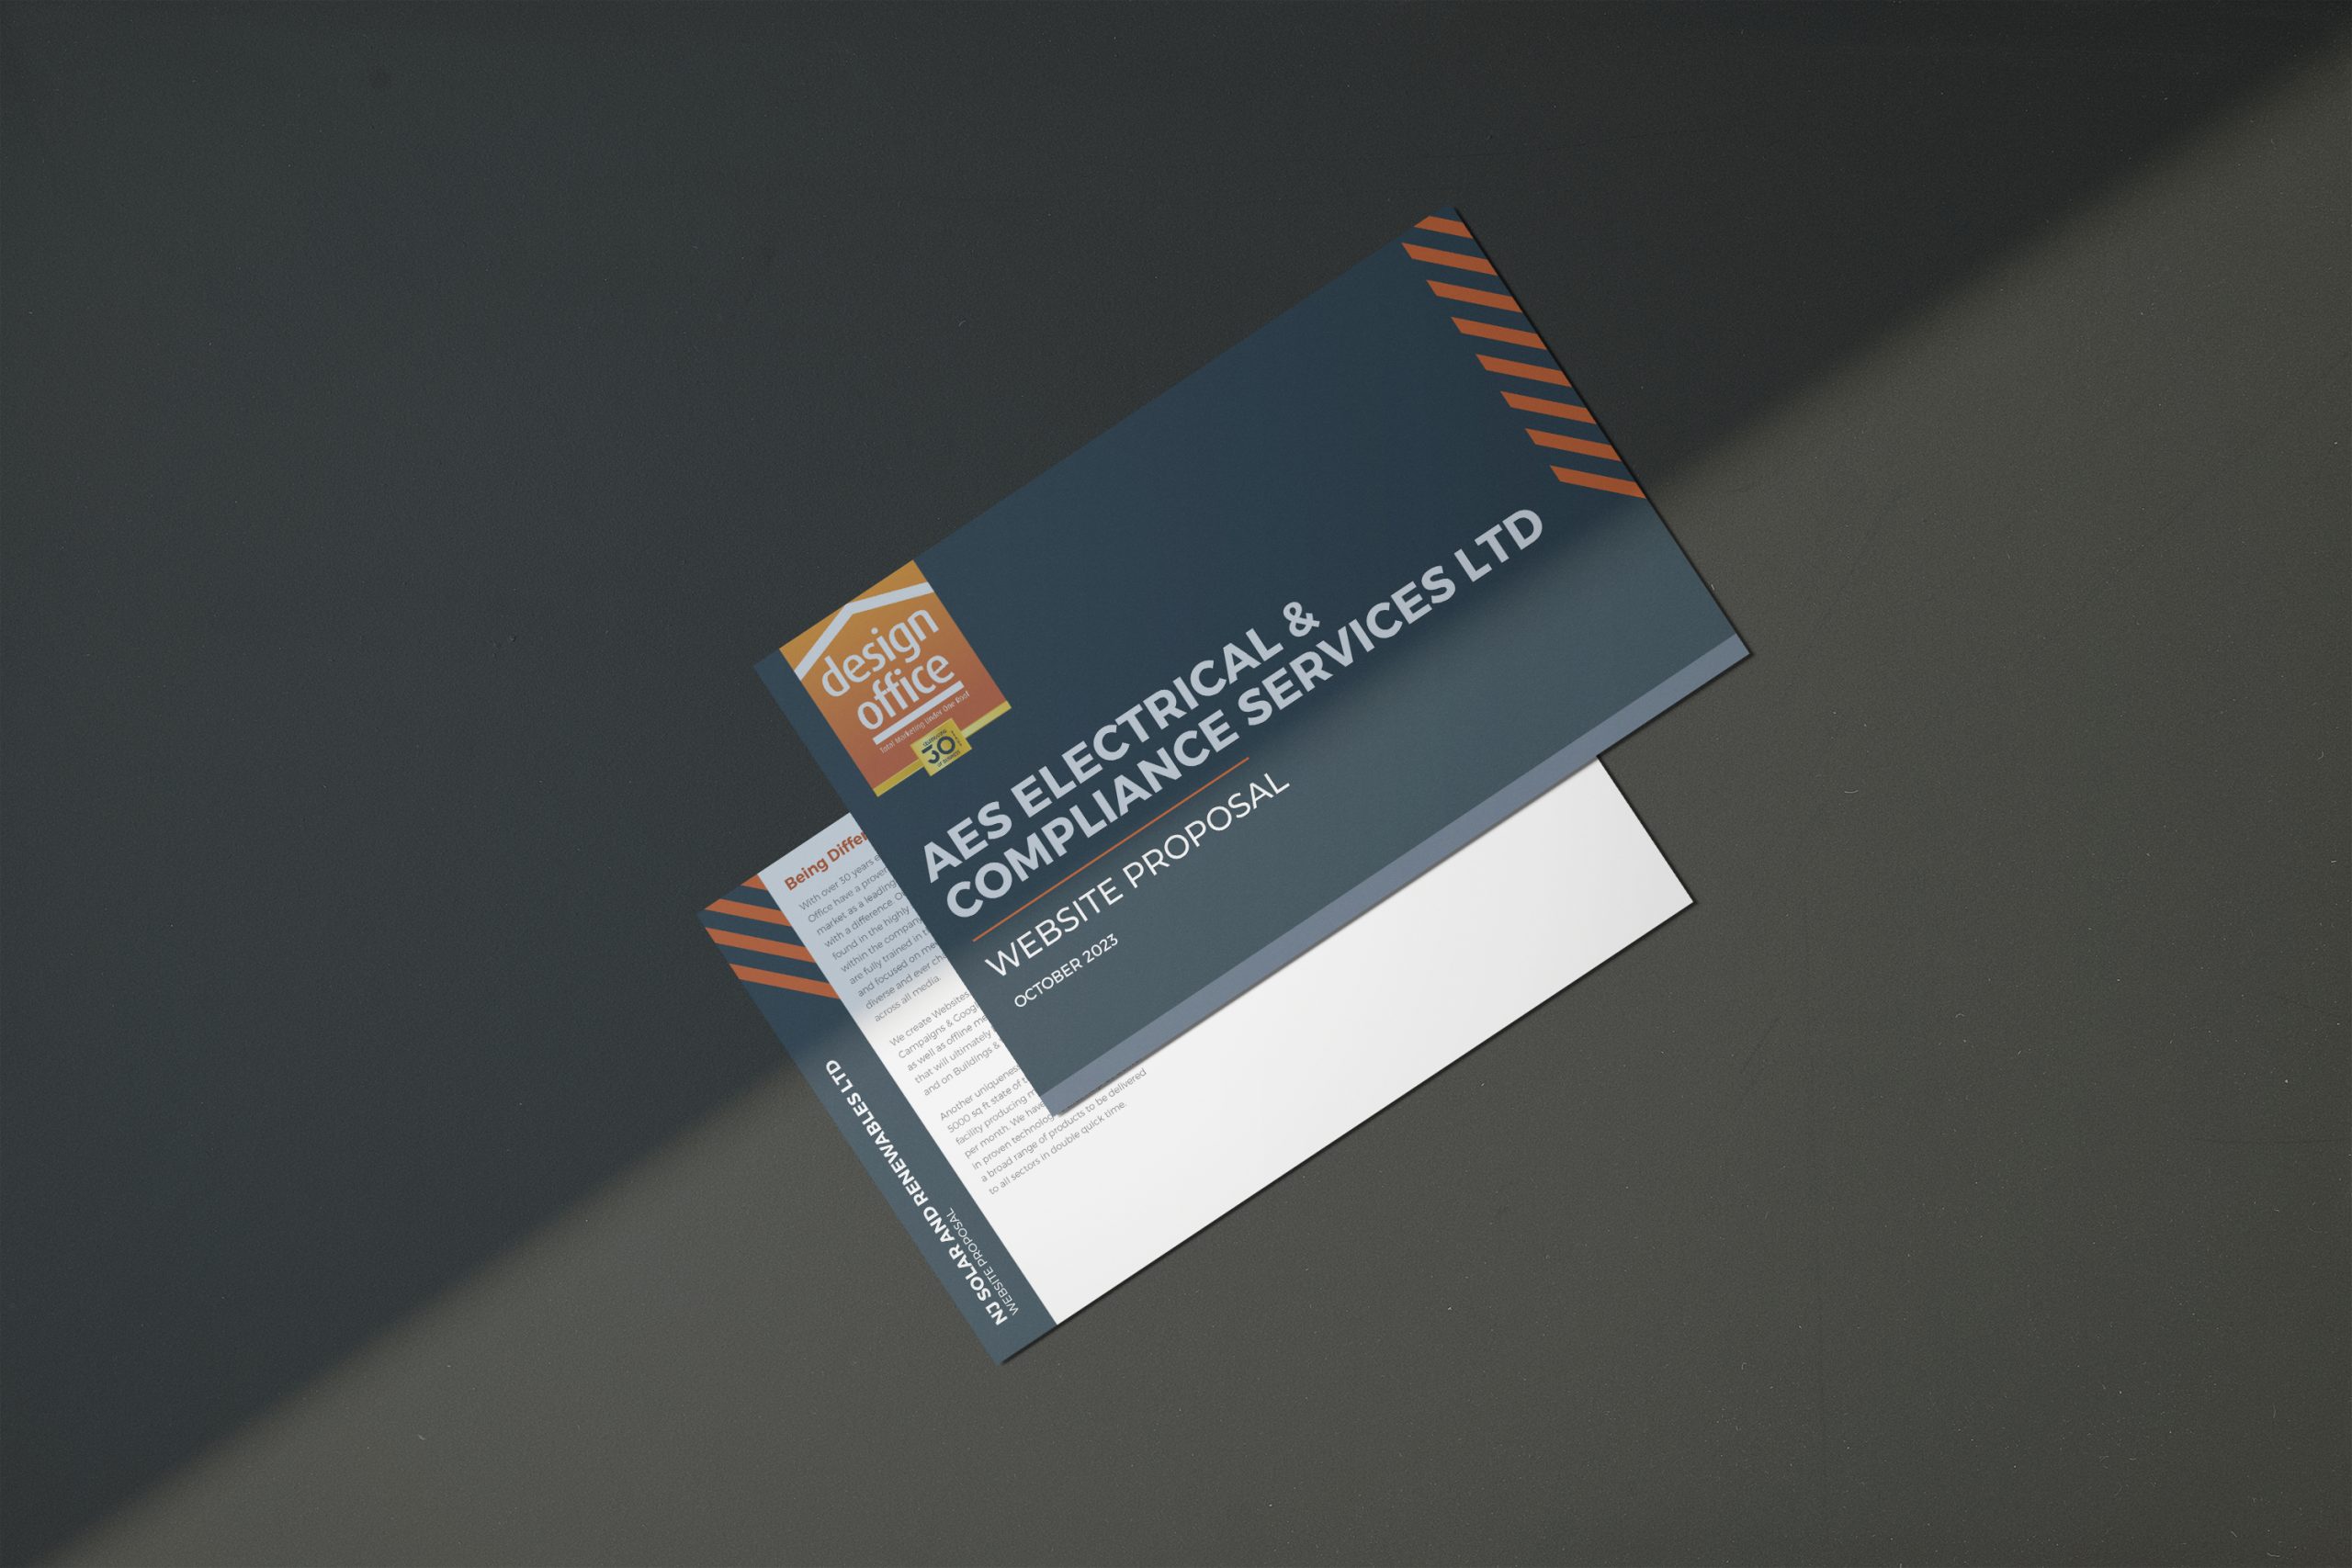 image of marketing business card produced by our cheshire agency